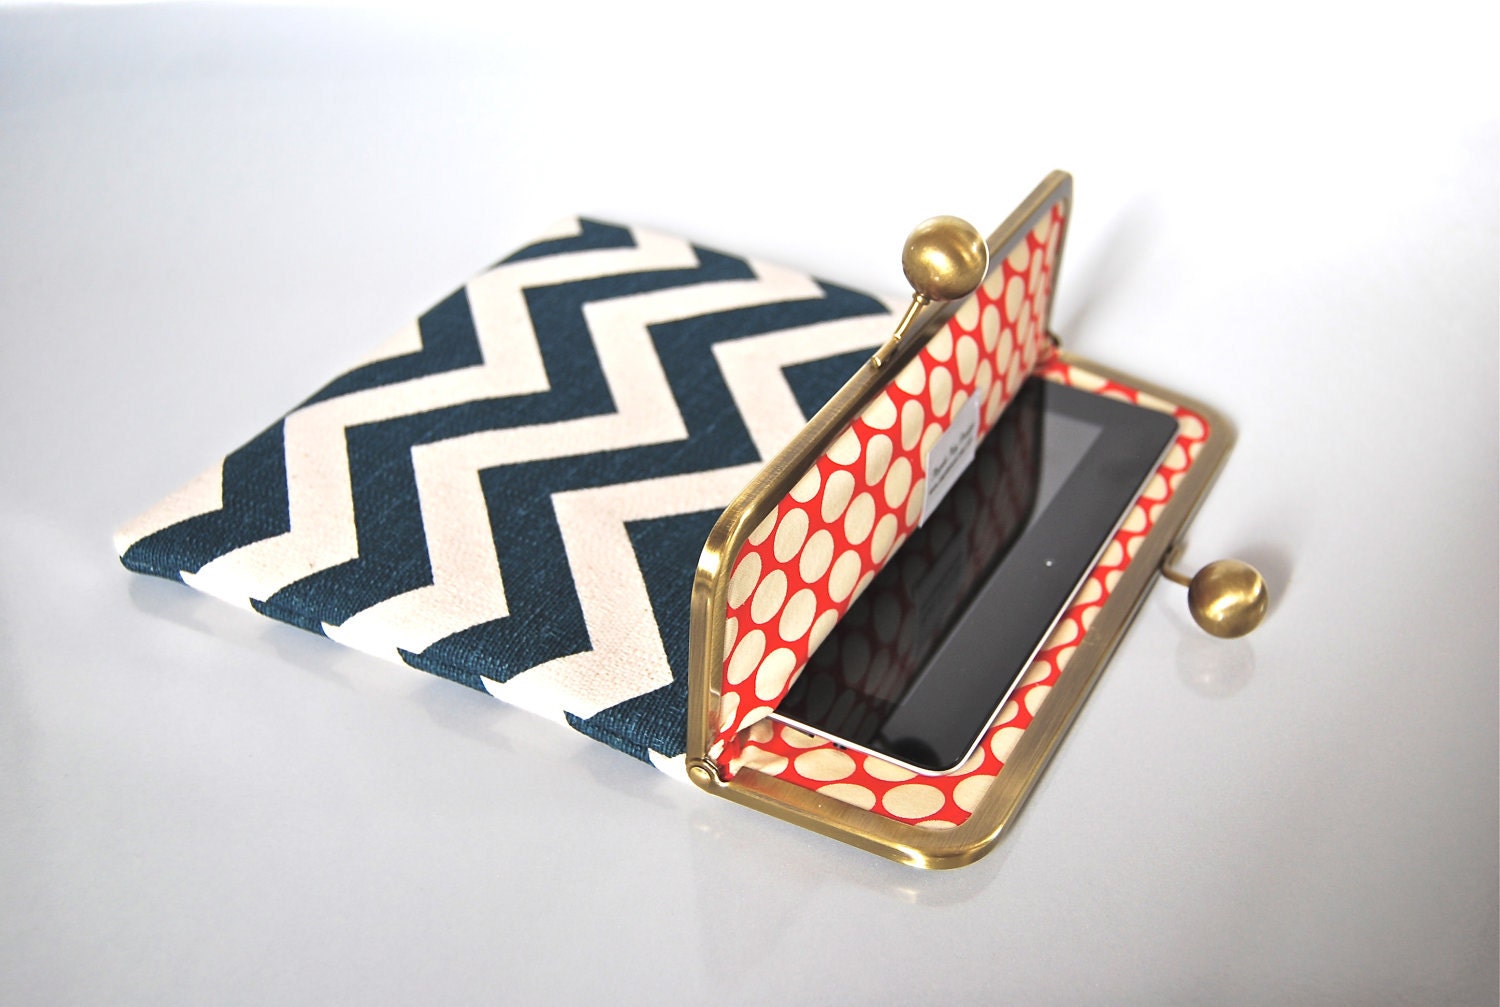 Reserved Listing only for Deven - iPad Clutch Case "Navy Chevron"